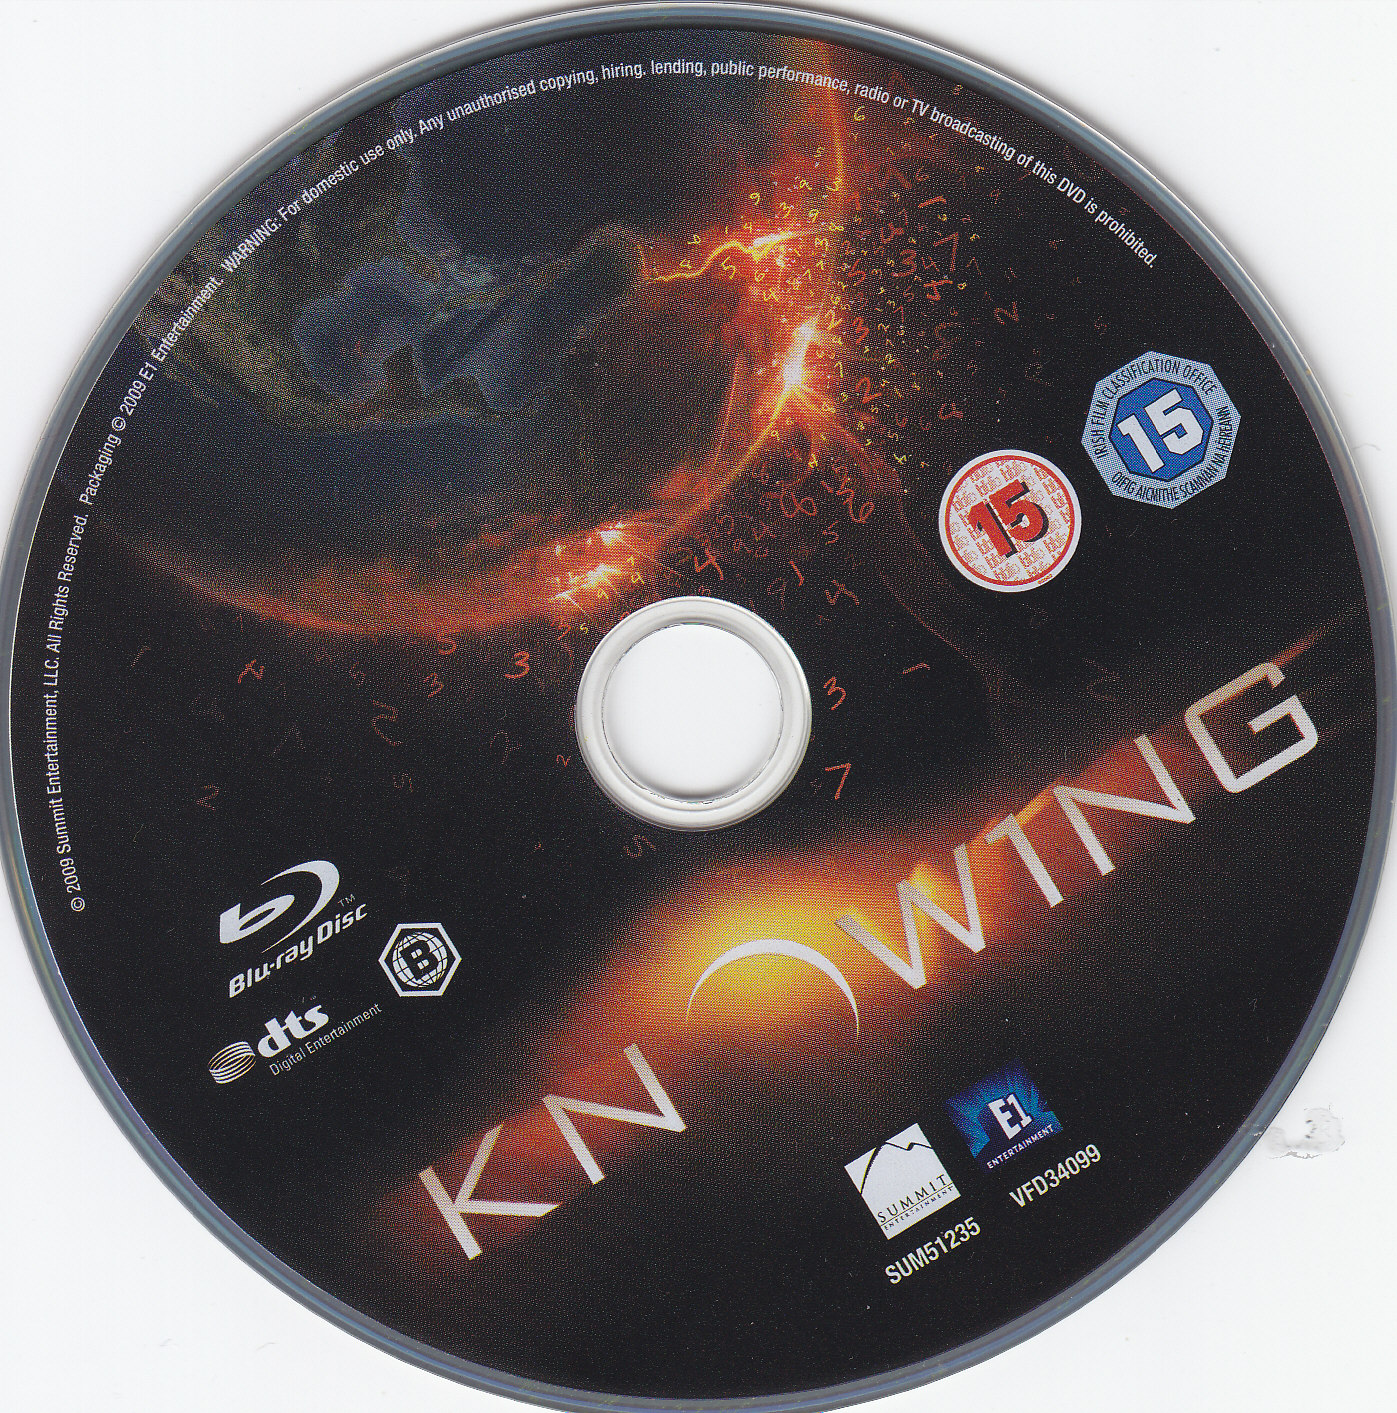 Predictions - Knowing Zone 1 (BLU-RAY)